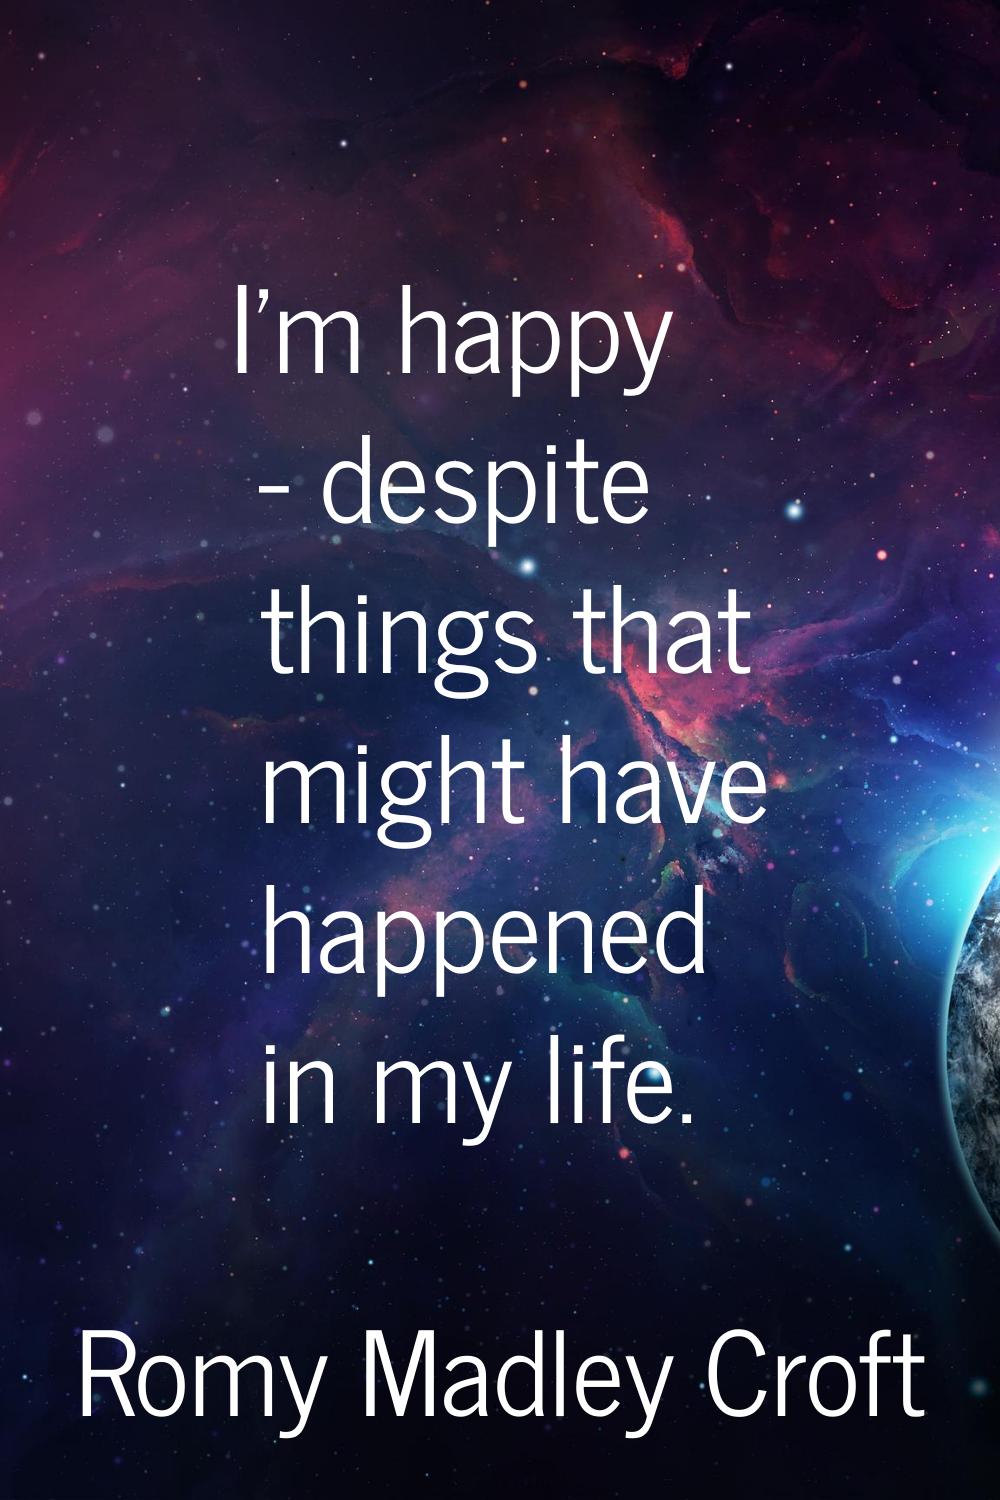 I'm happy - despite things that might have happened in my life.